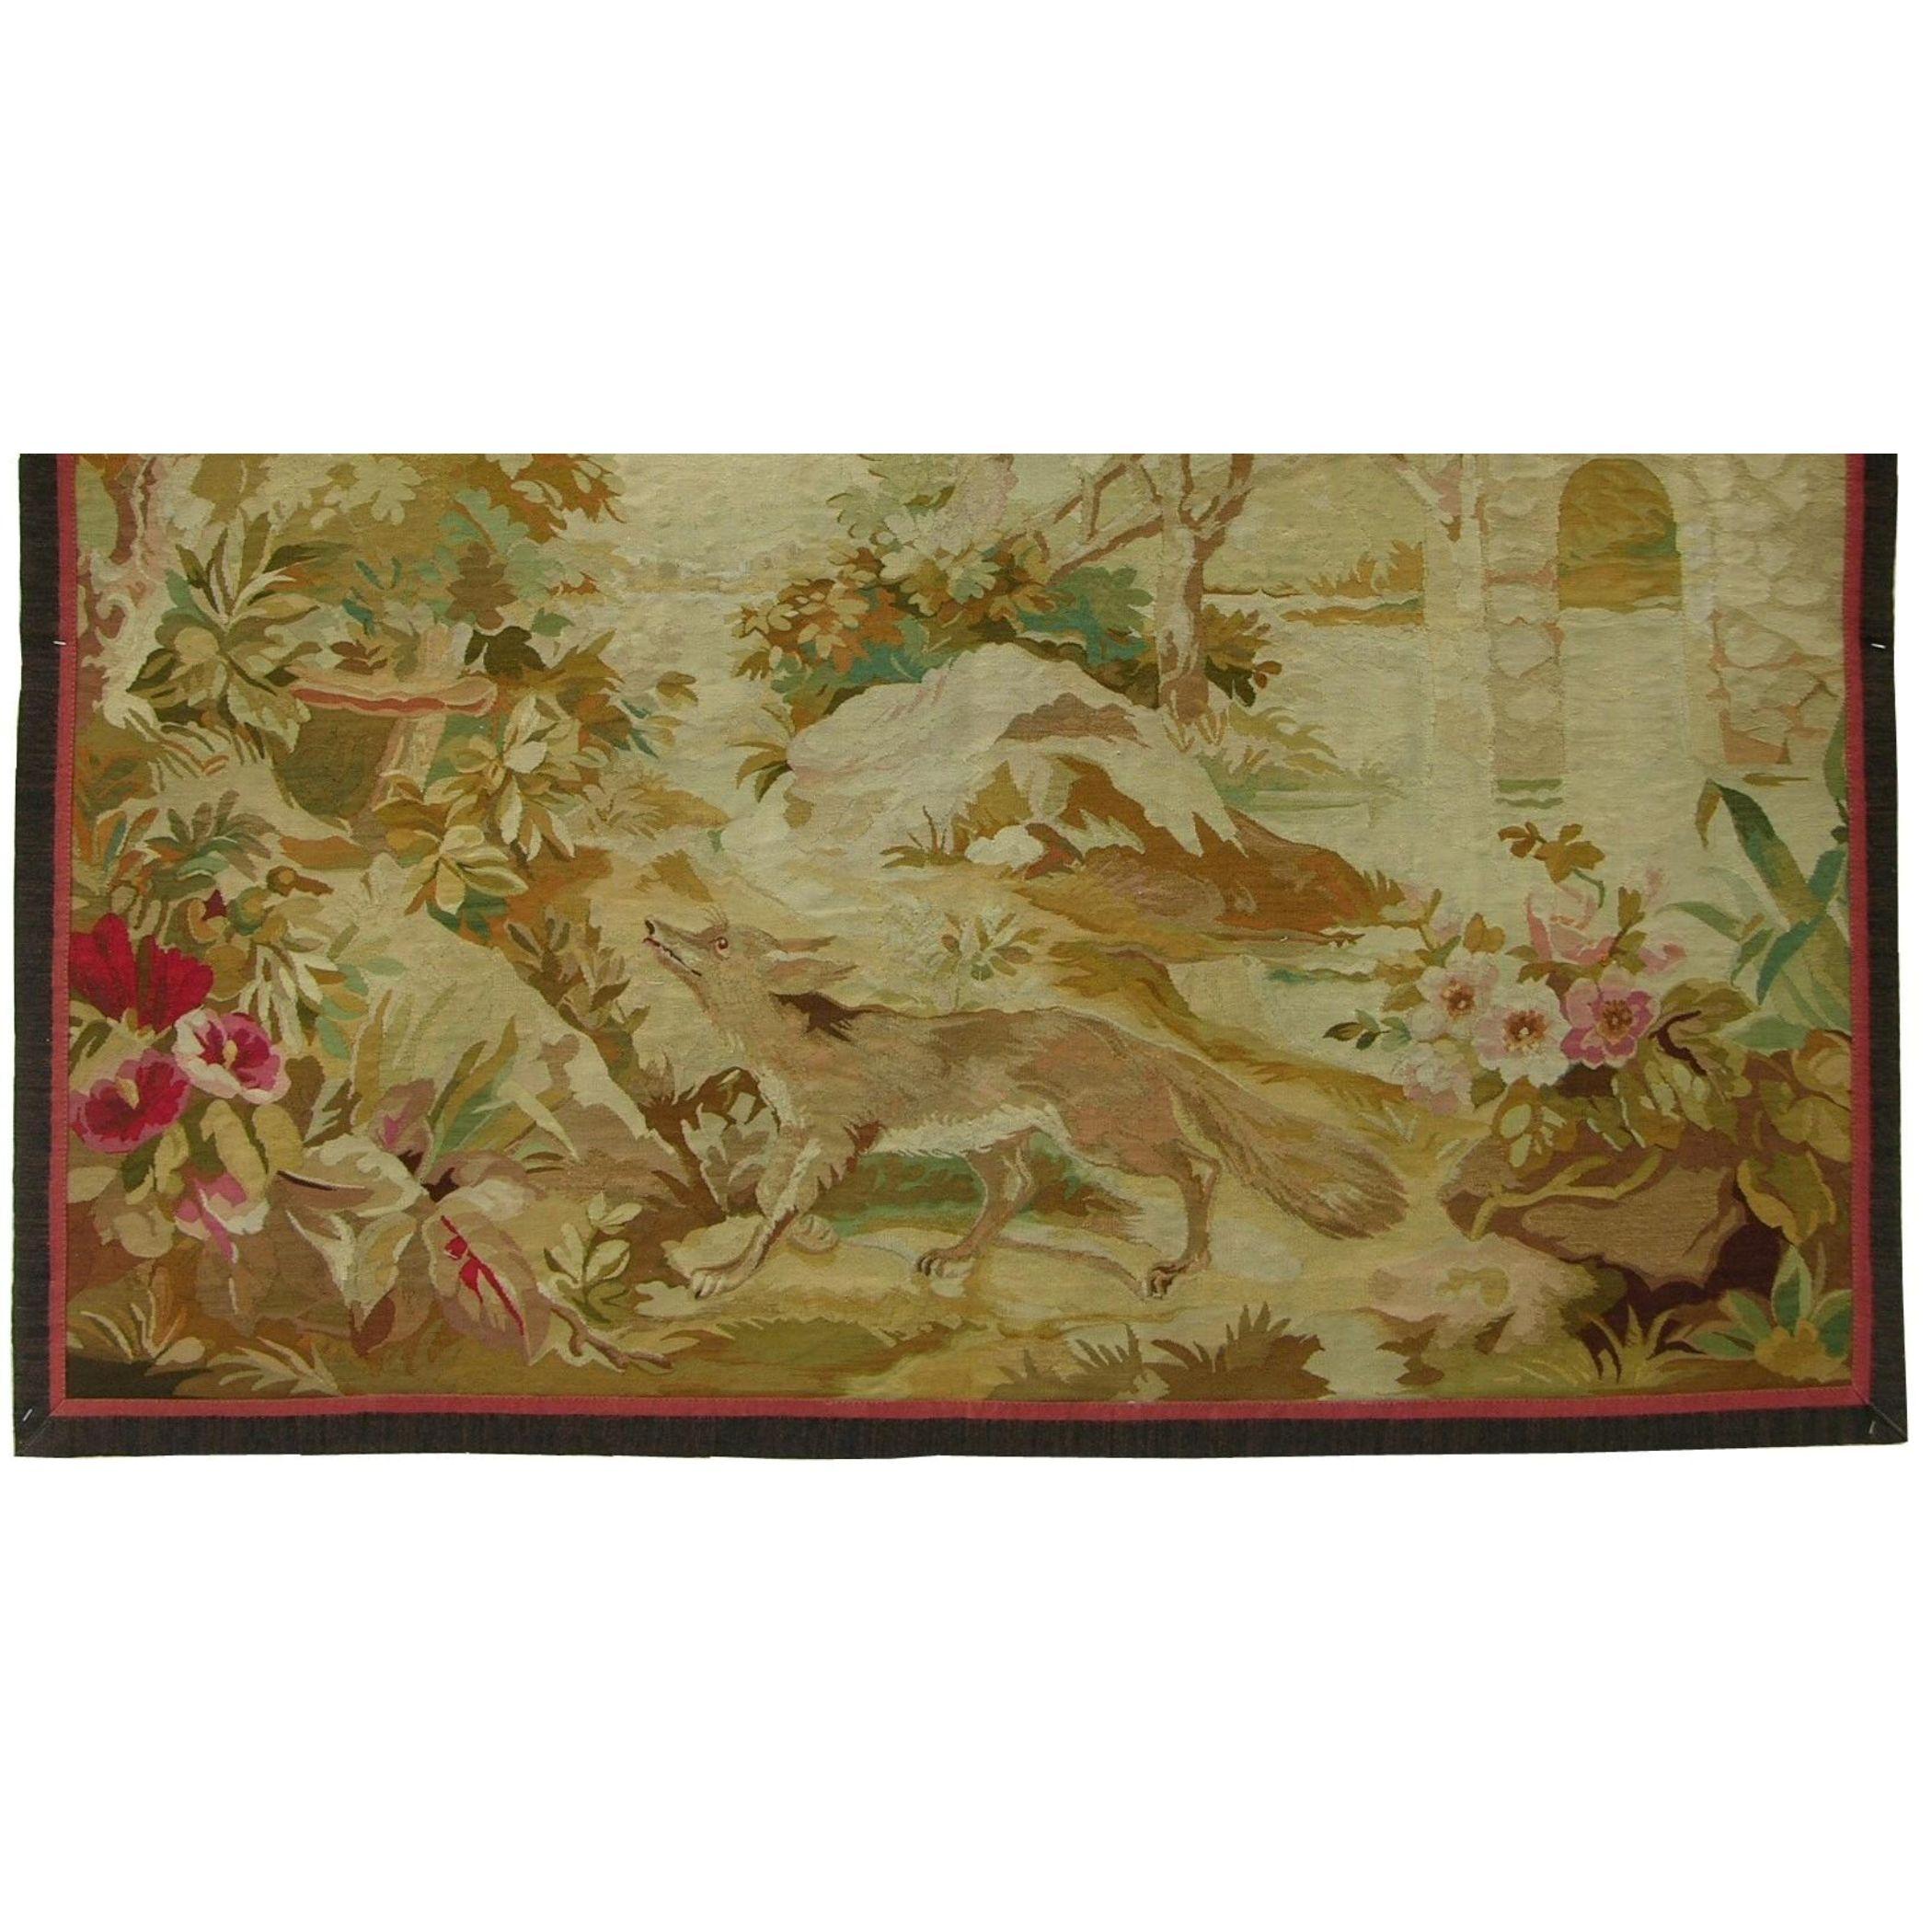 Unknown Antique 1900 French Tapestry 5' X 4'6